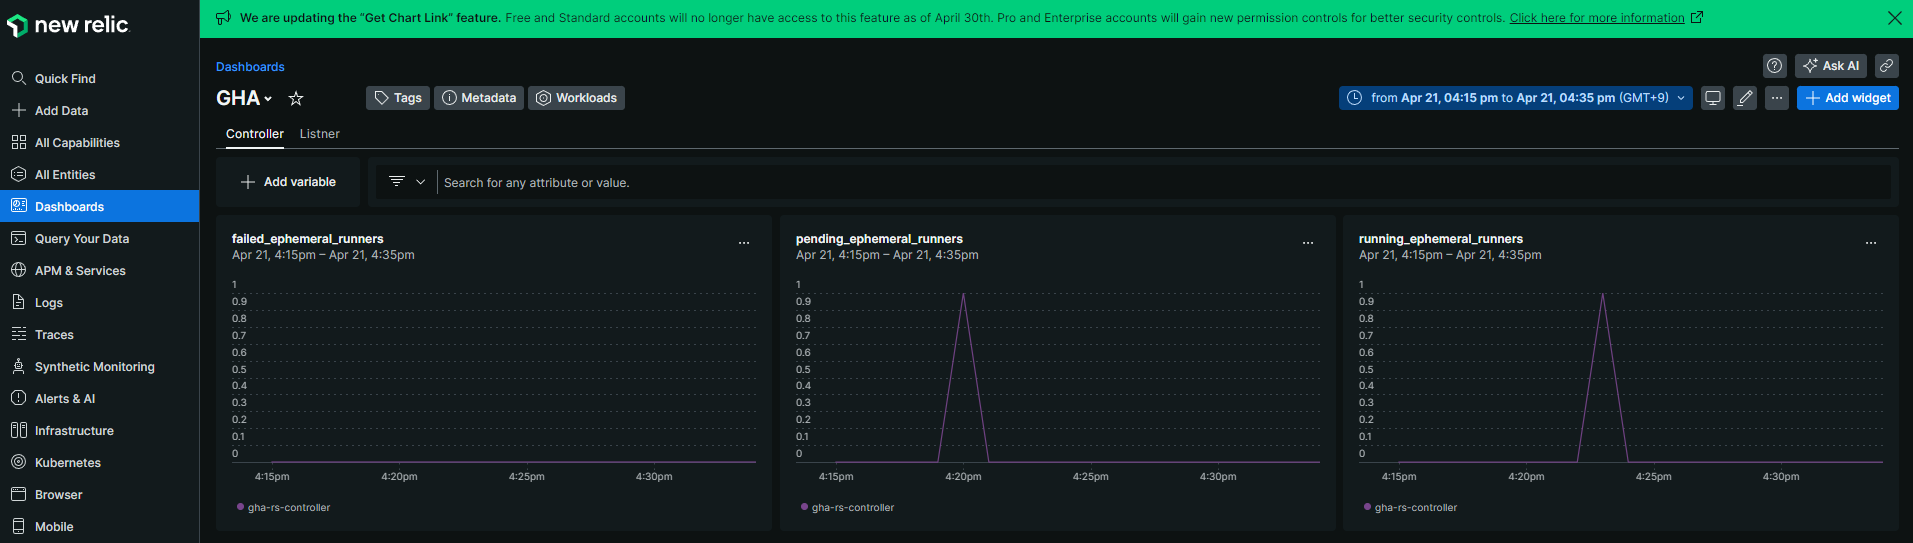 newrelic-dashboard-controller.PNG